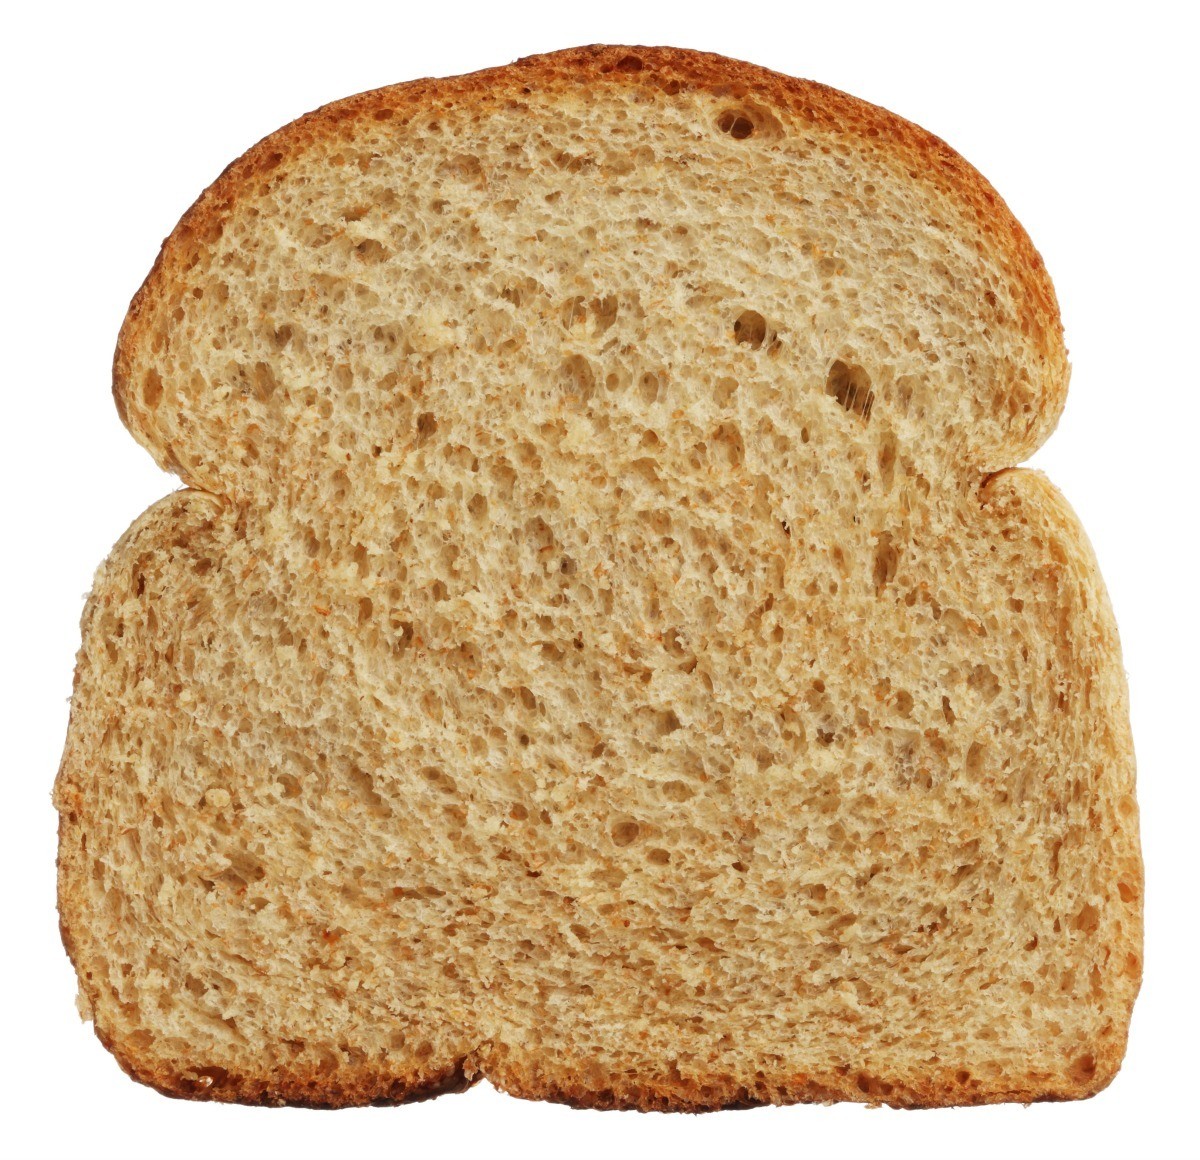 List 102+ Pictures Slices Of Bread In A Loaf Latest